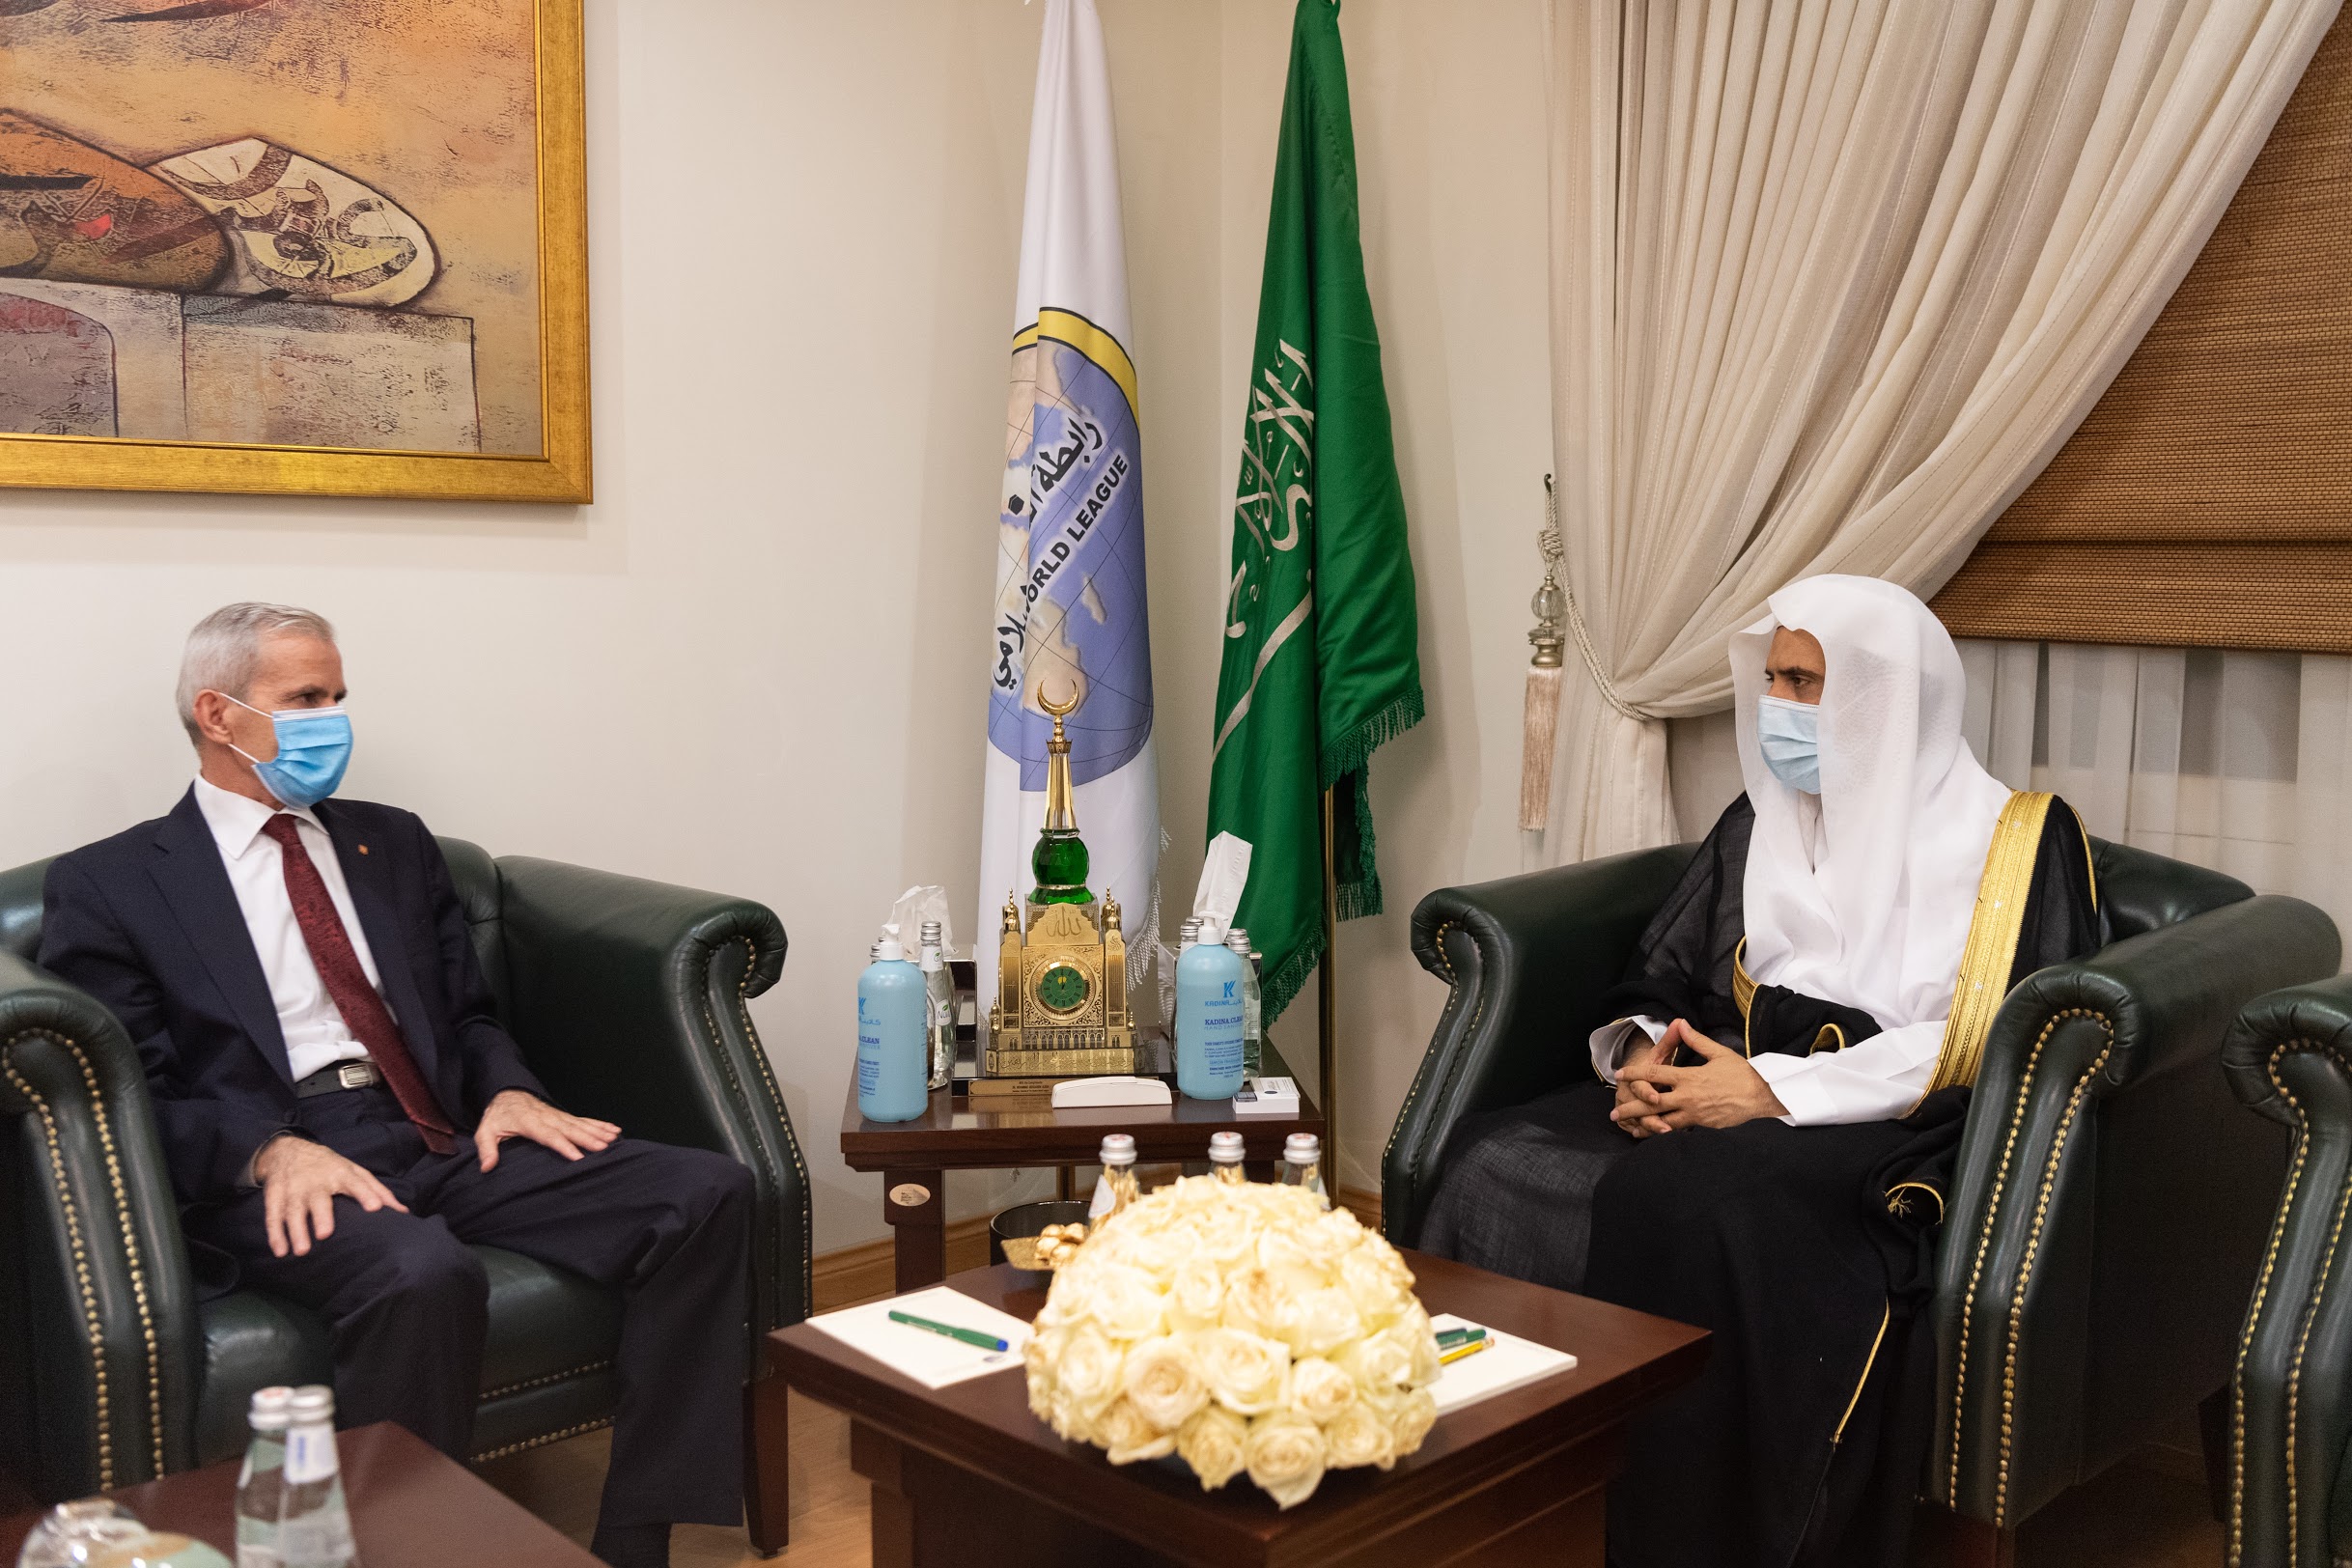 Dr Mohammad Alissa Hosted Several Ambassadors At The Muslim World League Headquarters